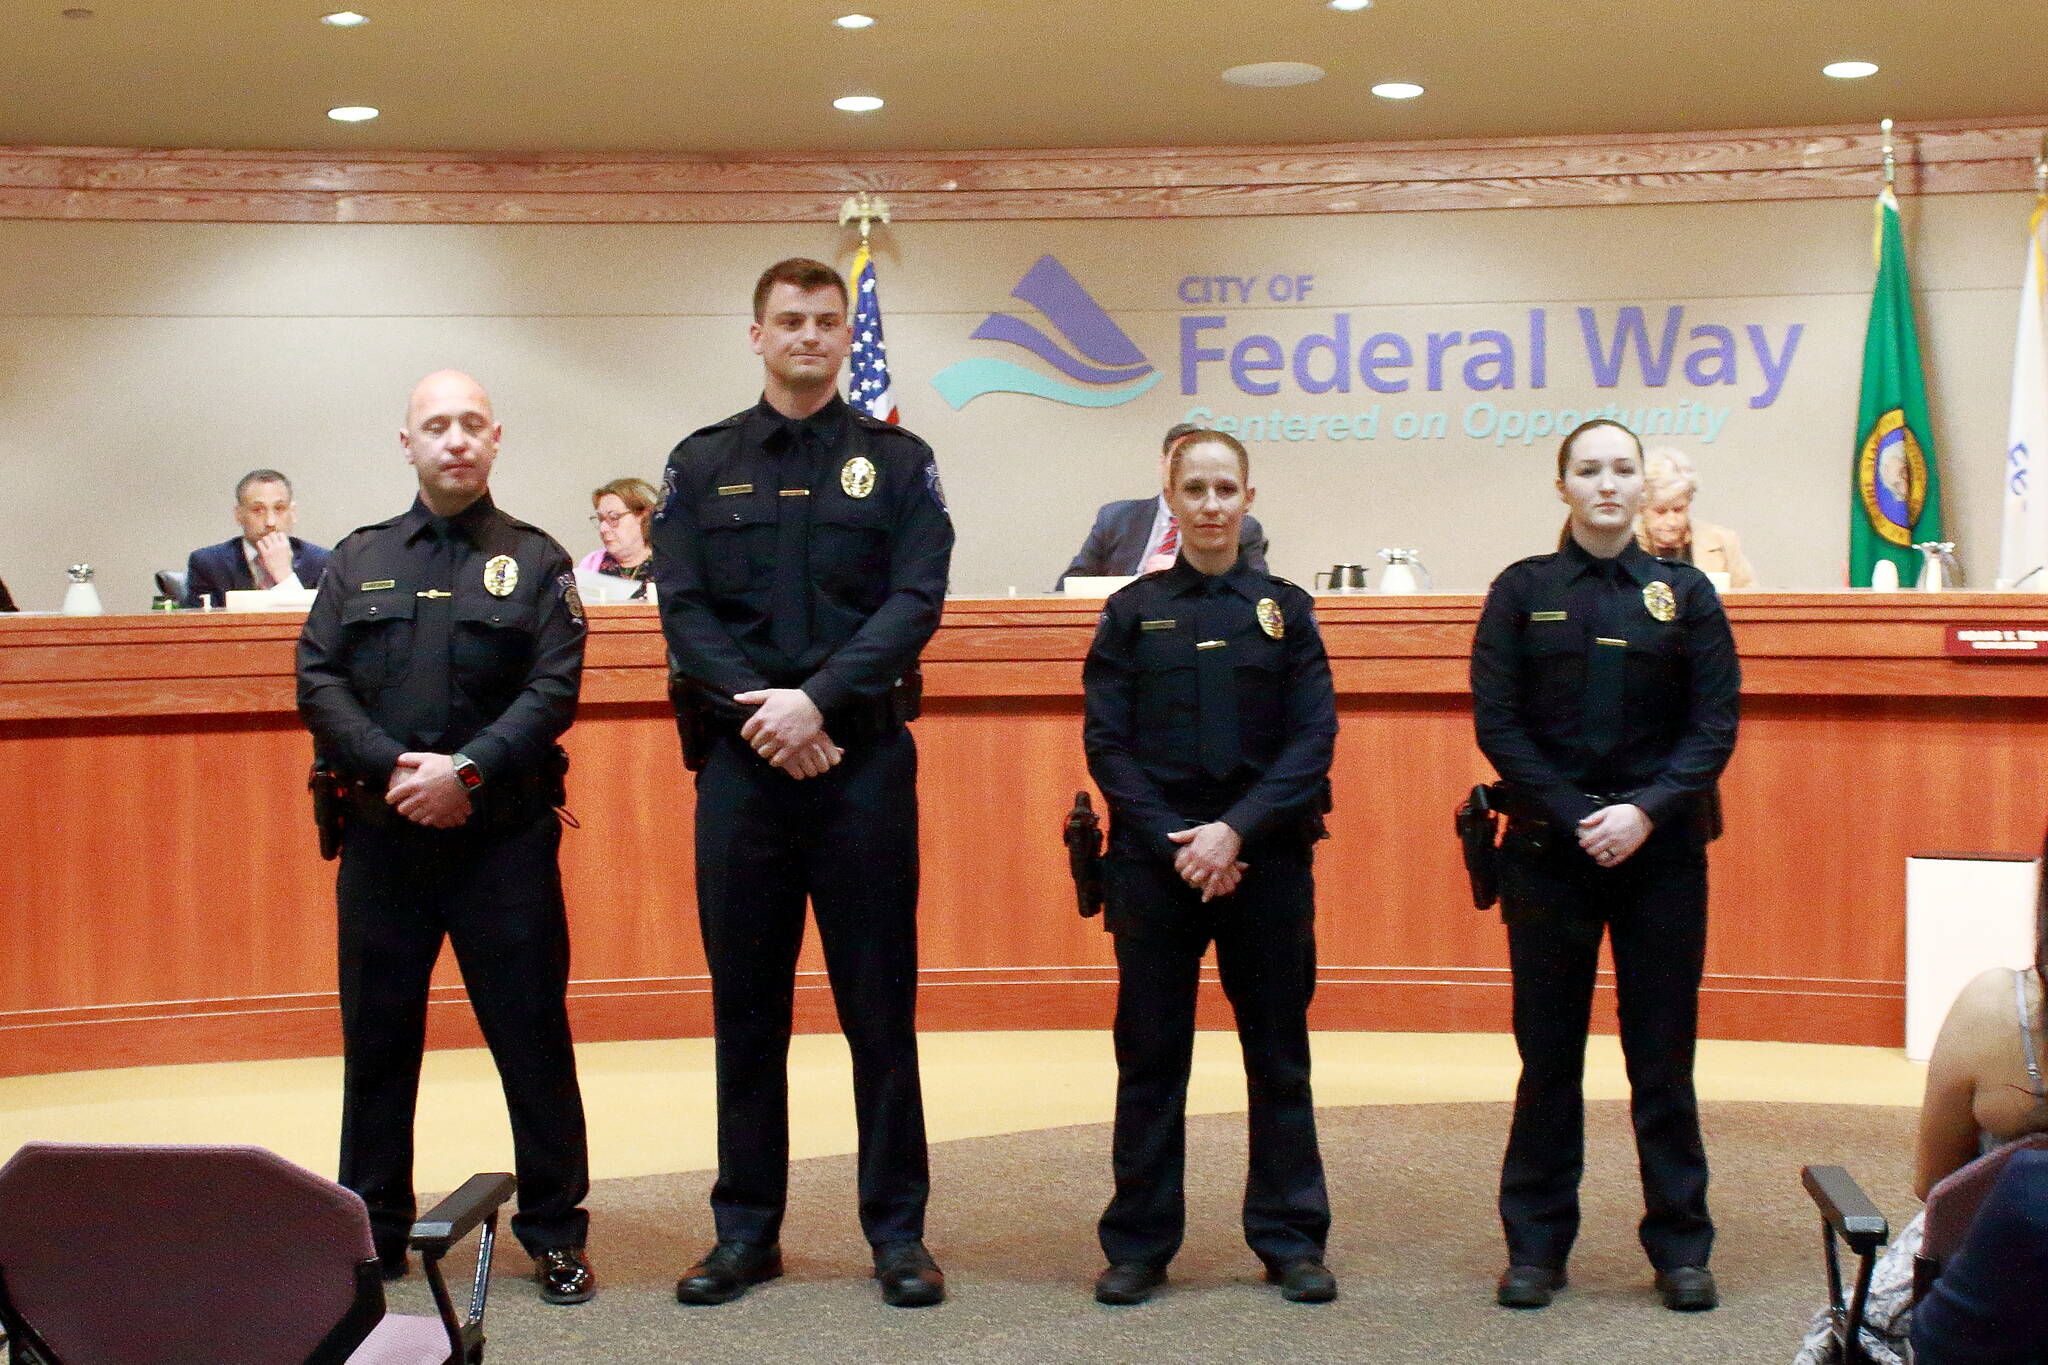 New officers of the Federal Way Police Department: Officer Sergey Peshkov, Officer Troy Petersohn, Officer Carrie Boschetti and Officer Jessie Perry. Photo by Keelin Everly-Lang / The Mirror